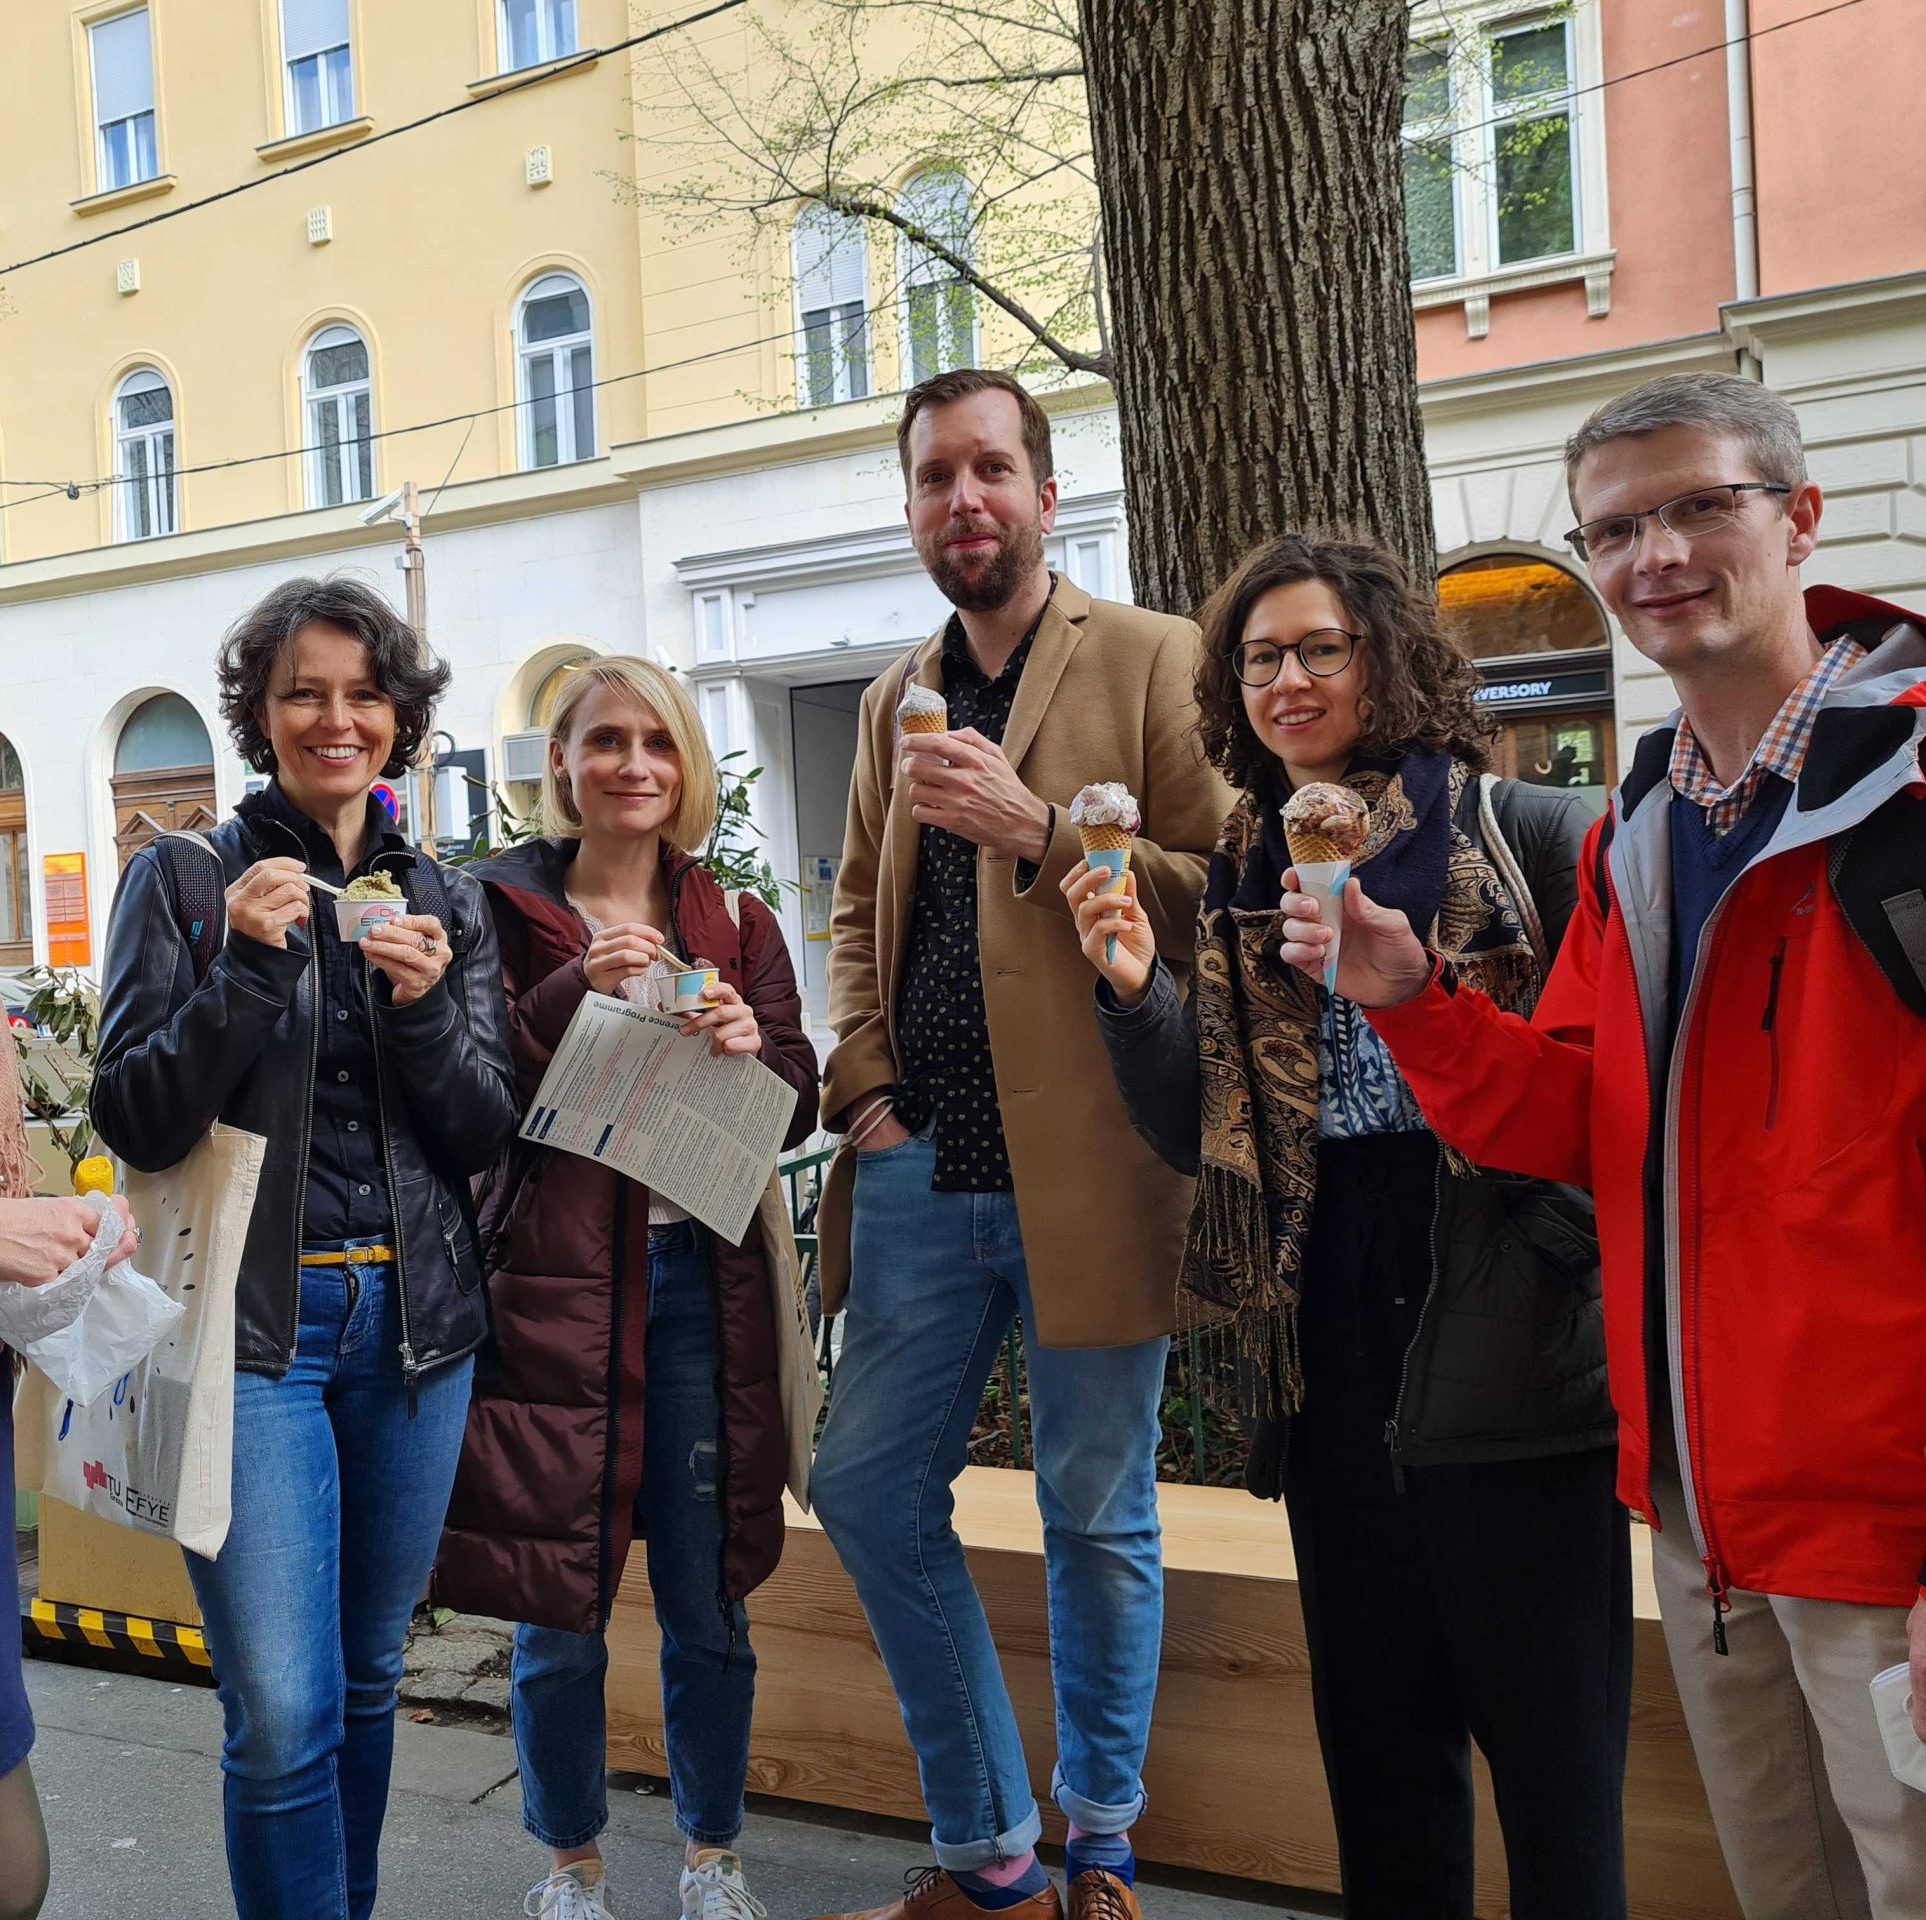 A group of people taking part at the EFYE give away walk while eating ice cream.